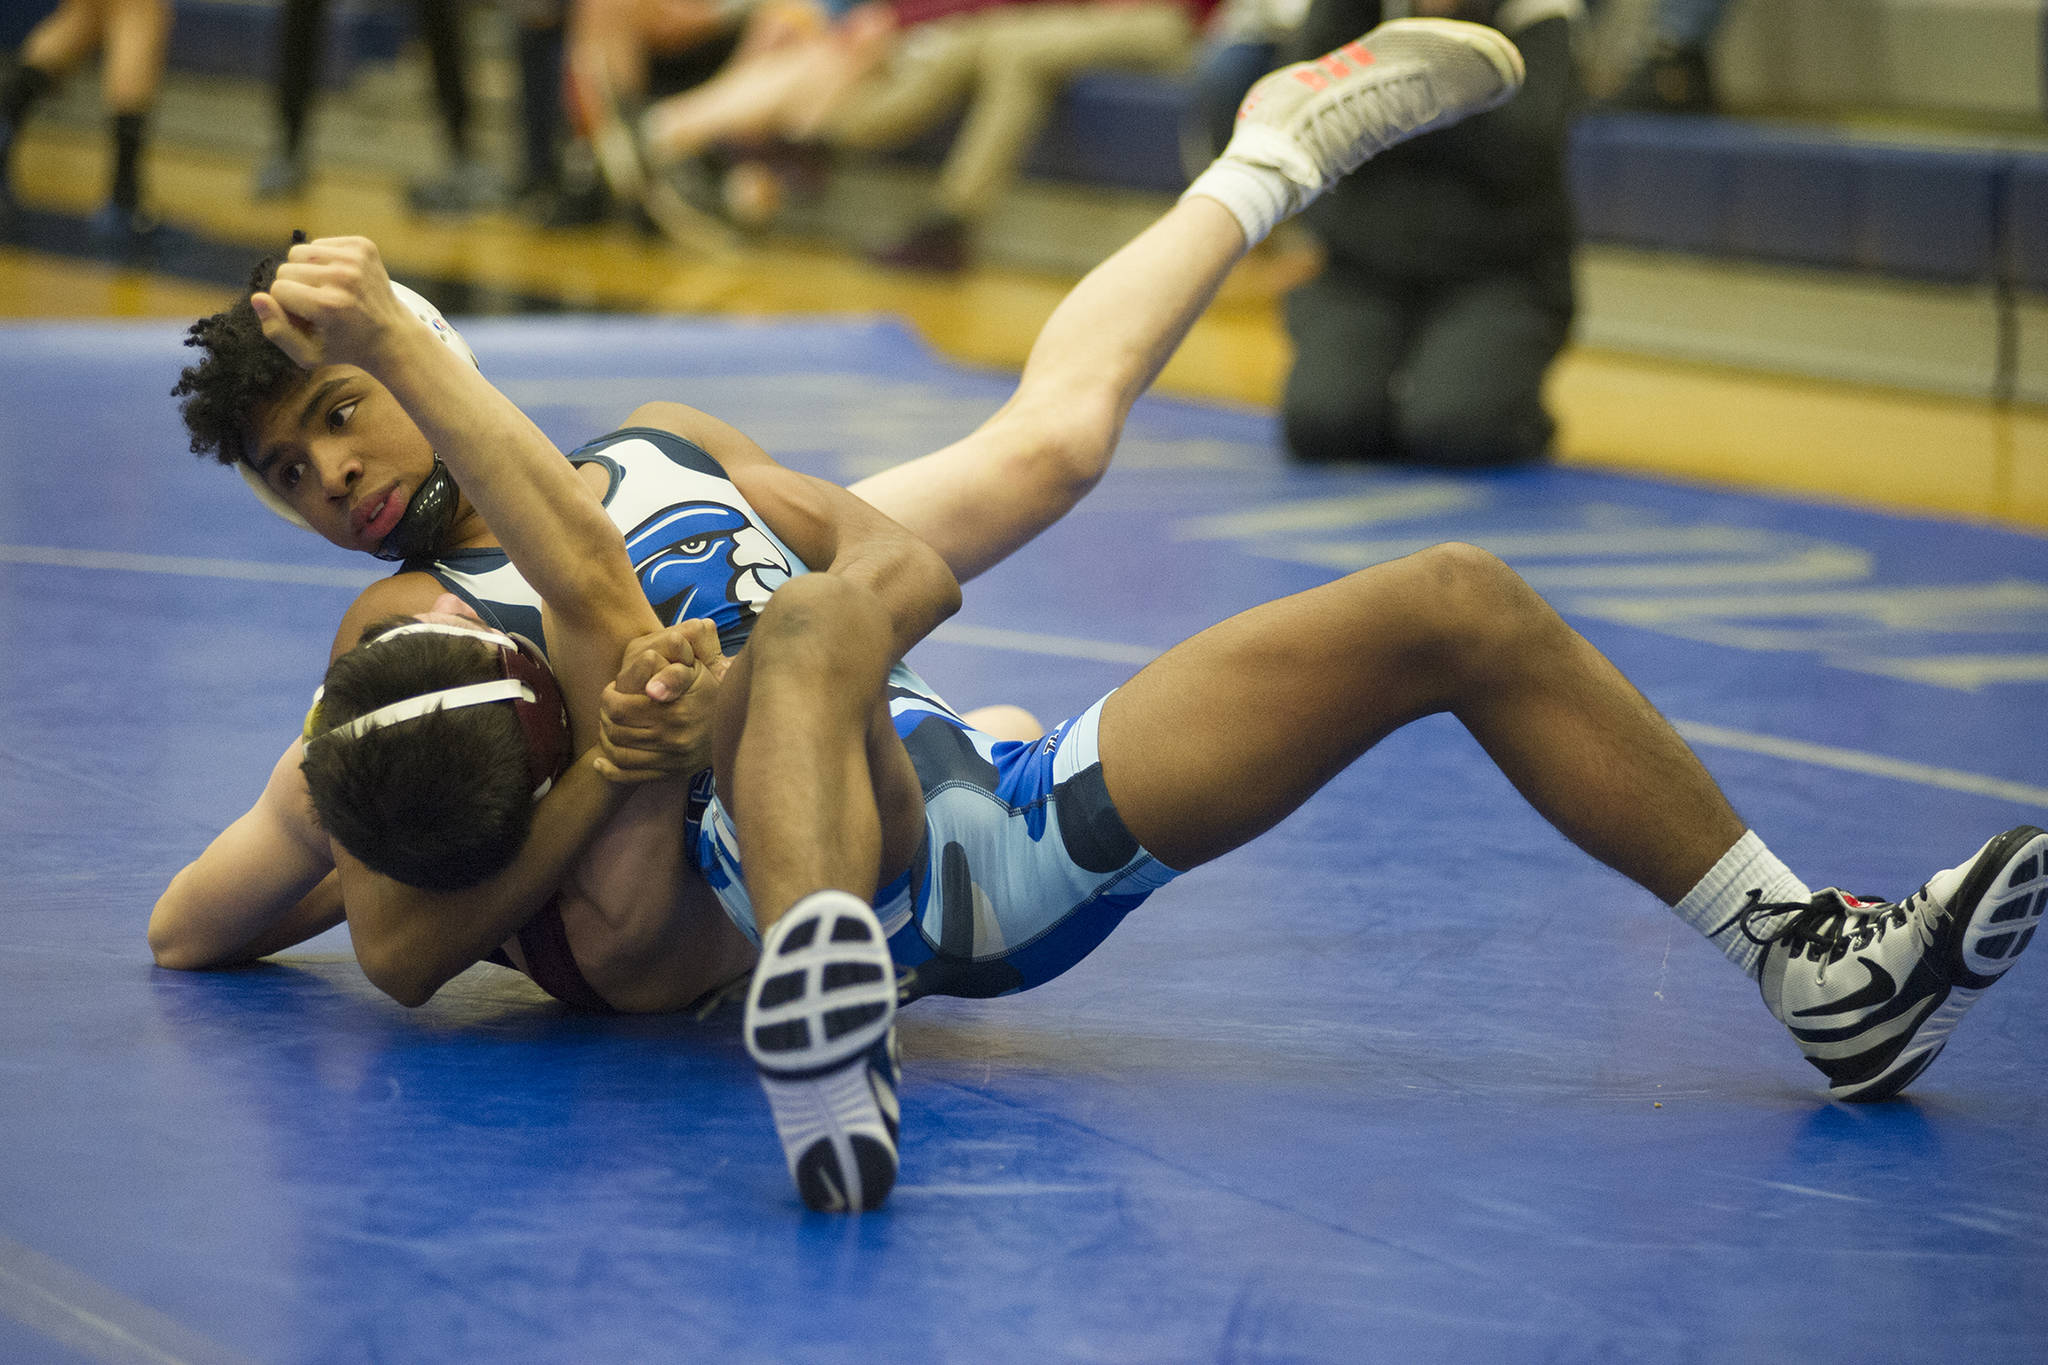 Juneau-Douglas junior Jahrease Mays looks over at the official as he pins Ketchikan’s Patrick Rauwolf in the 125-pound bracket final of the Brandon Pilot Invitational on Saturday at Thunder Mountain High School. Mays won soon after. (Nolin Ainsworth | Juneau Empire)